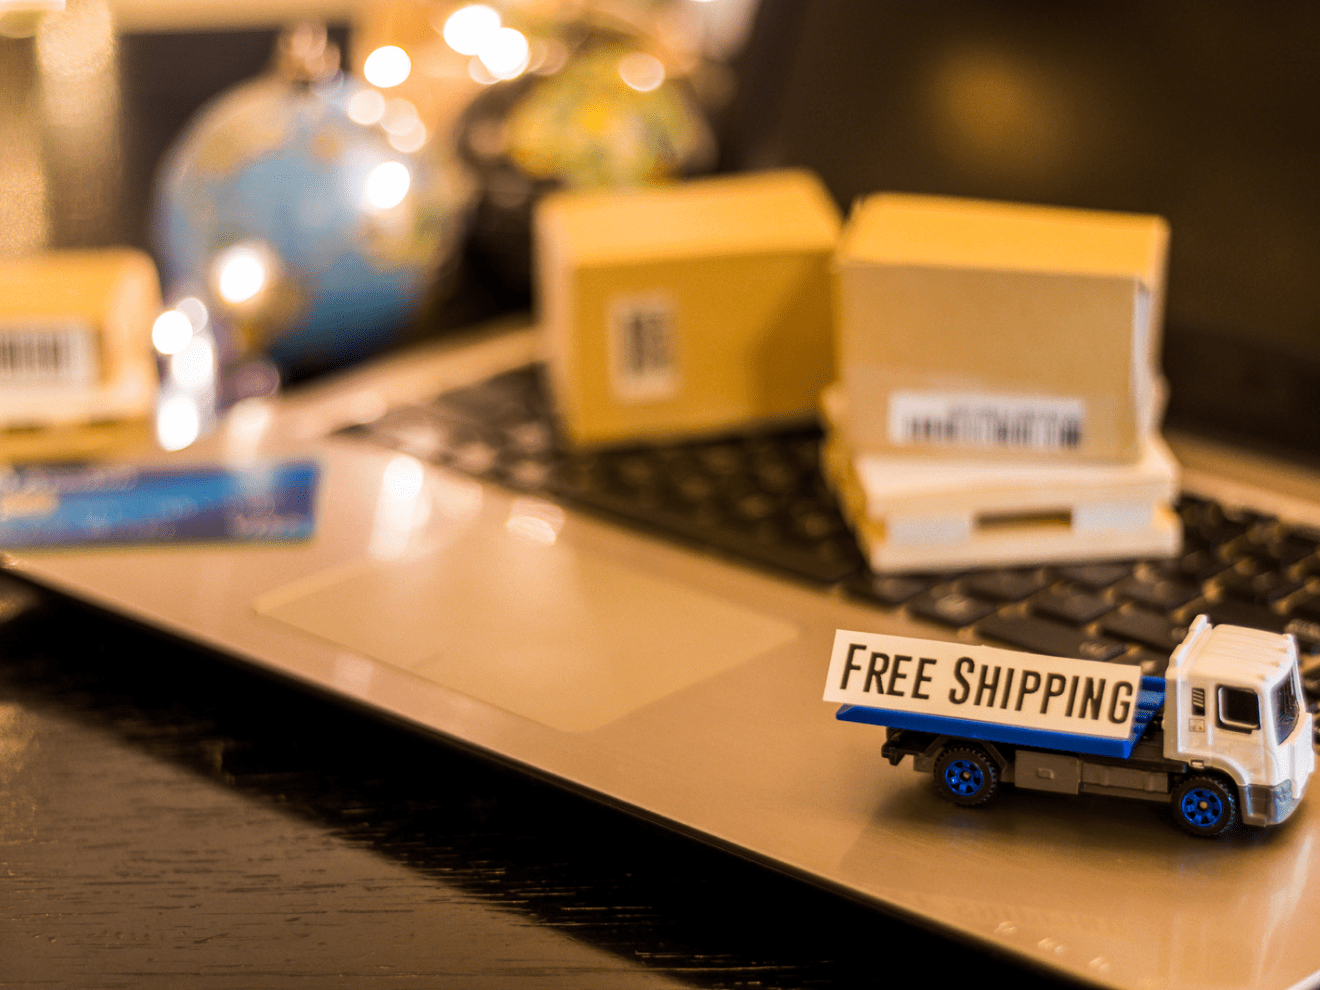 Free shipping is number one customers' expectation for Black Friday 2022